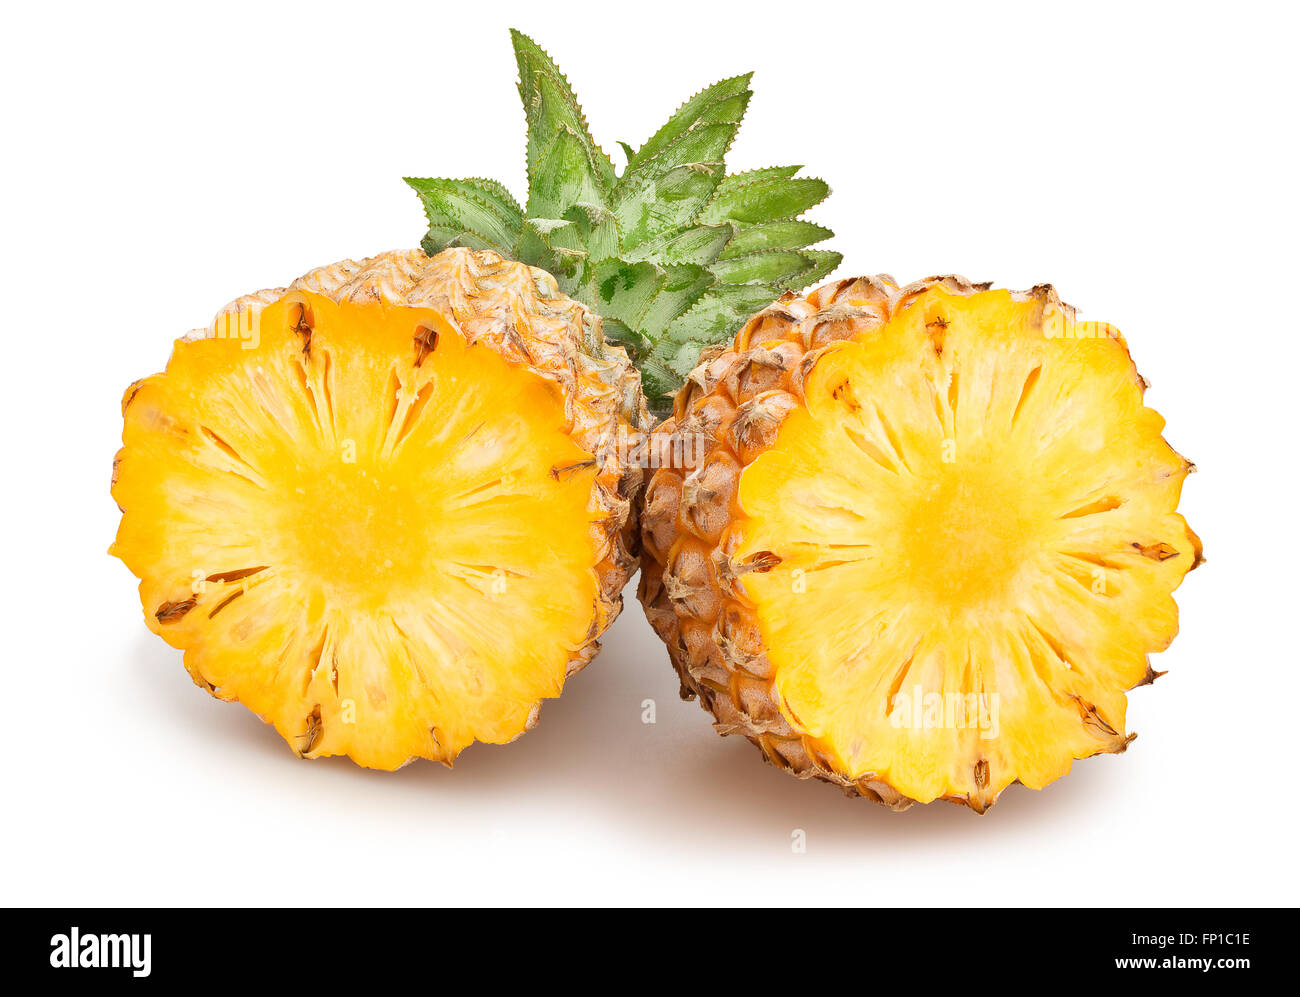 pineapple sliced isolated Stock Photo